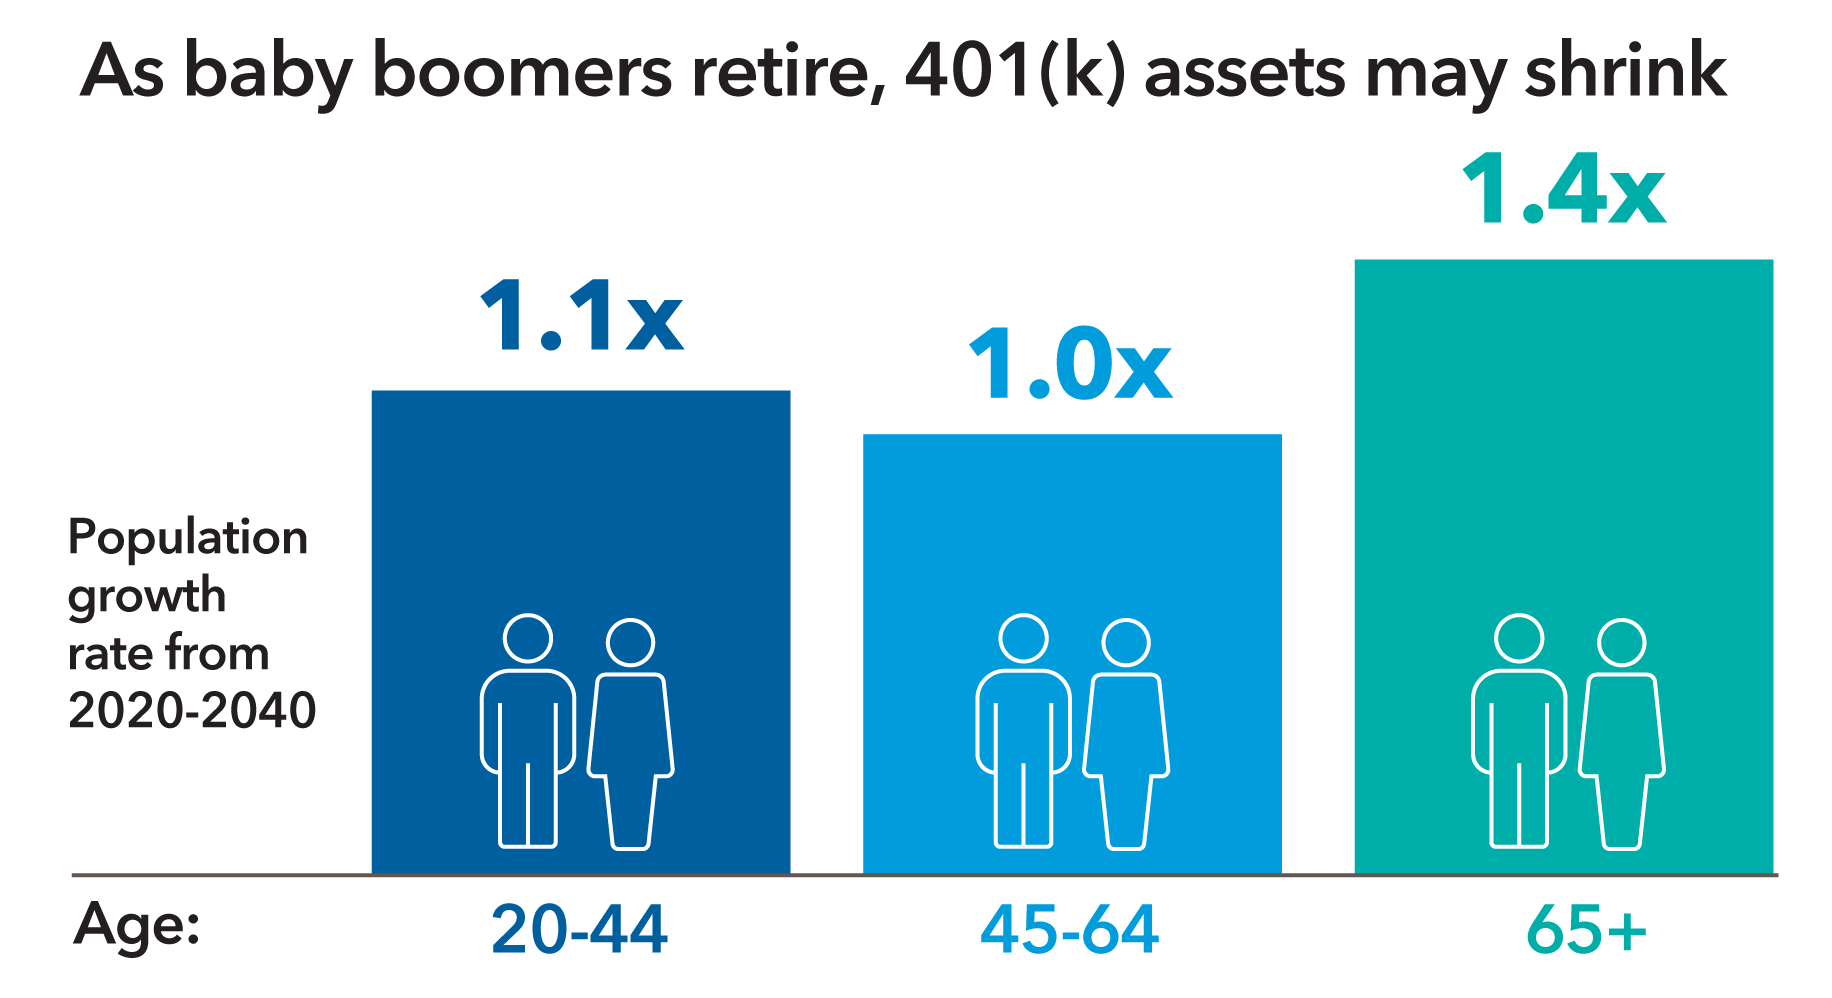 Infographic illustrates that as baby boomers retire, 401(k) assets may shrink, as their population growth rate is faster than other age groups. Between 2020 and 2040, the population growth rate is projected to increase 1.1 times for individuals ages 20 to 44, 1.0 times for individuals ages 45 to 64 and 1.4 times for individuals ages 65 and older.